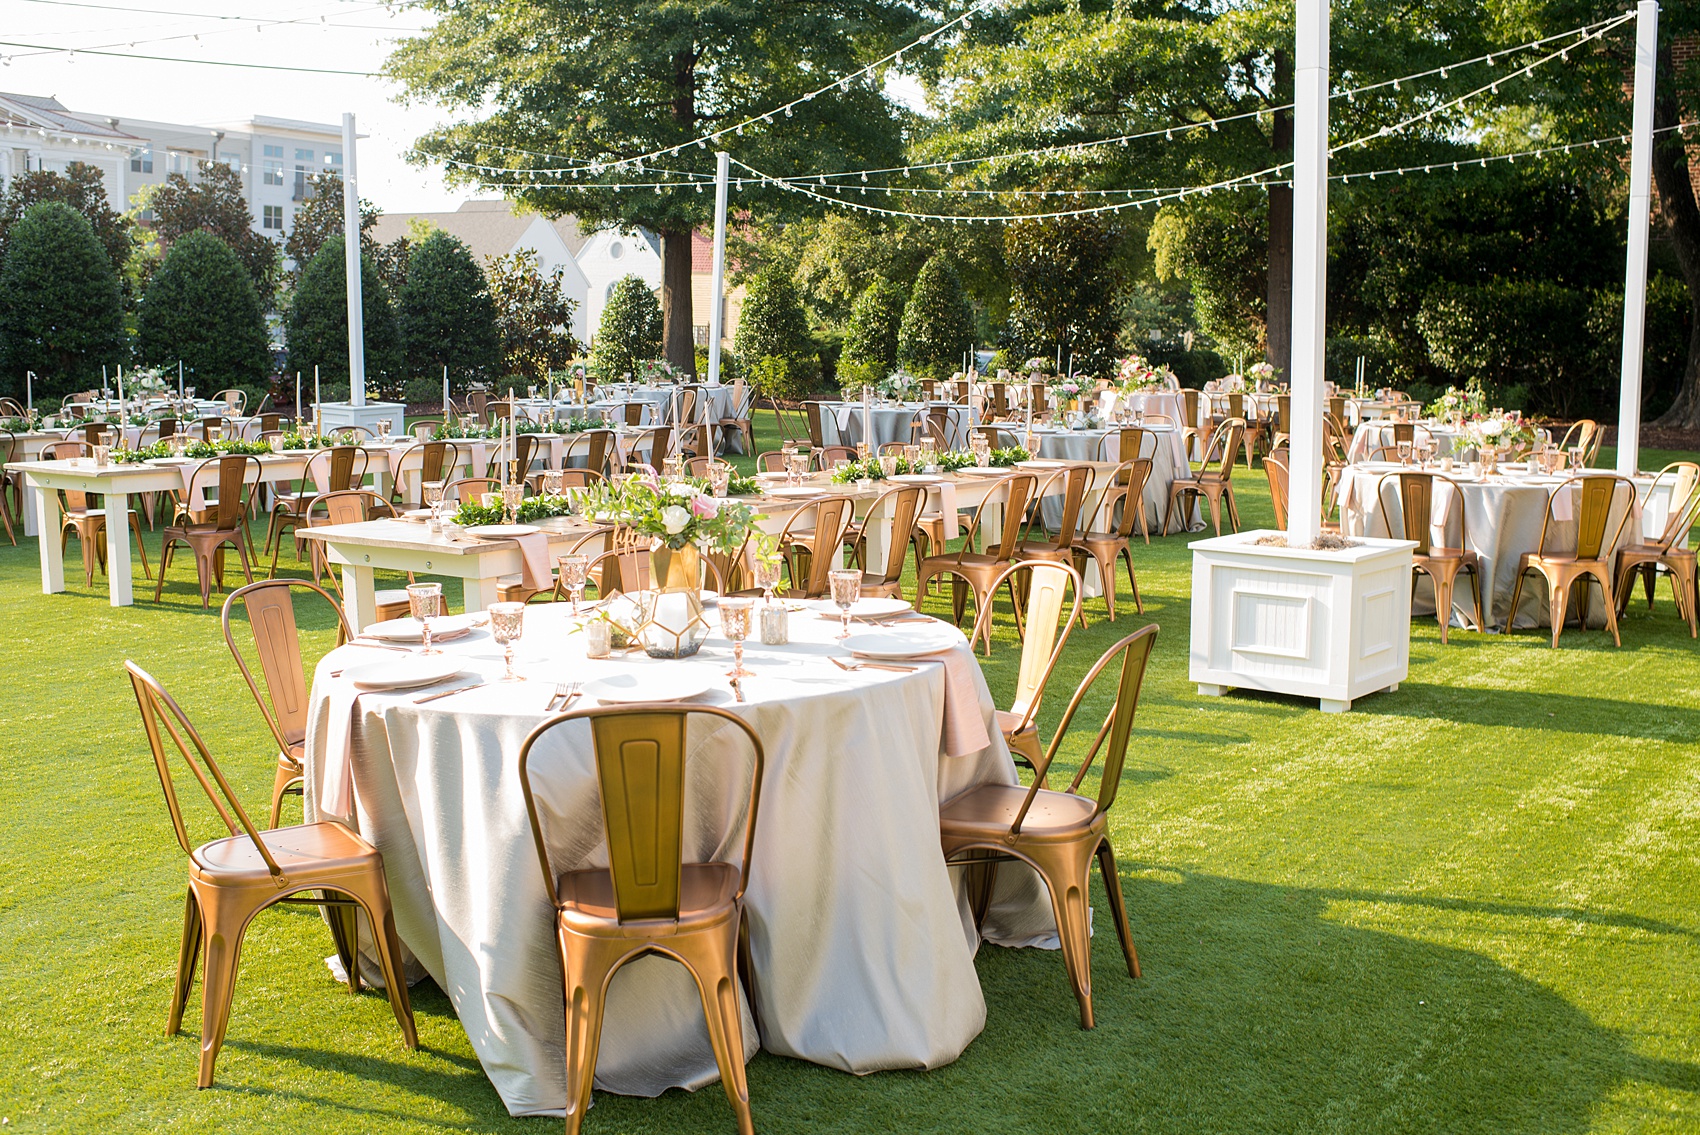 Mikkel Paige Photography pictures from a wedding at Merrimon-Wynne House in Raleigh, NC. Photo of the outdoor reception on the lawn, with round and rectangular farm tables, pink linen napkins, grey plates, and floral centerpieces.